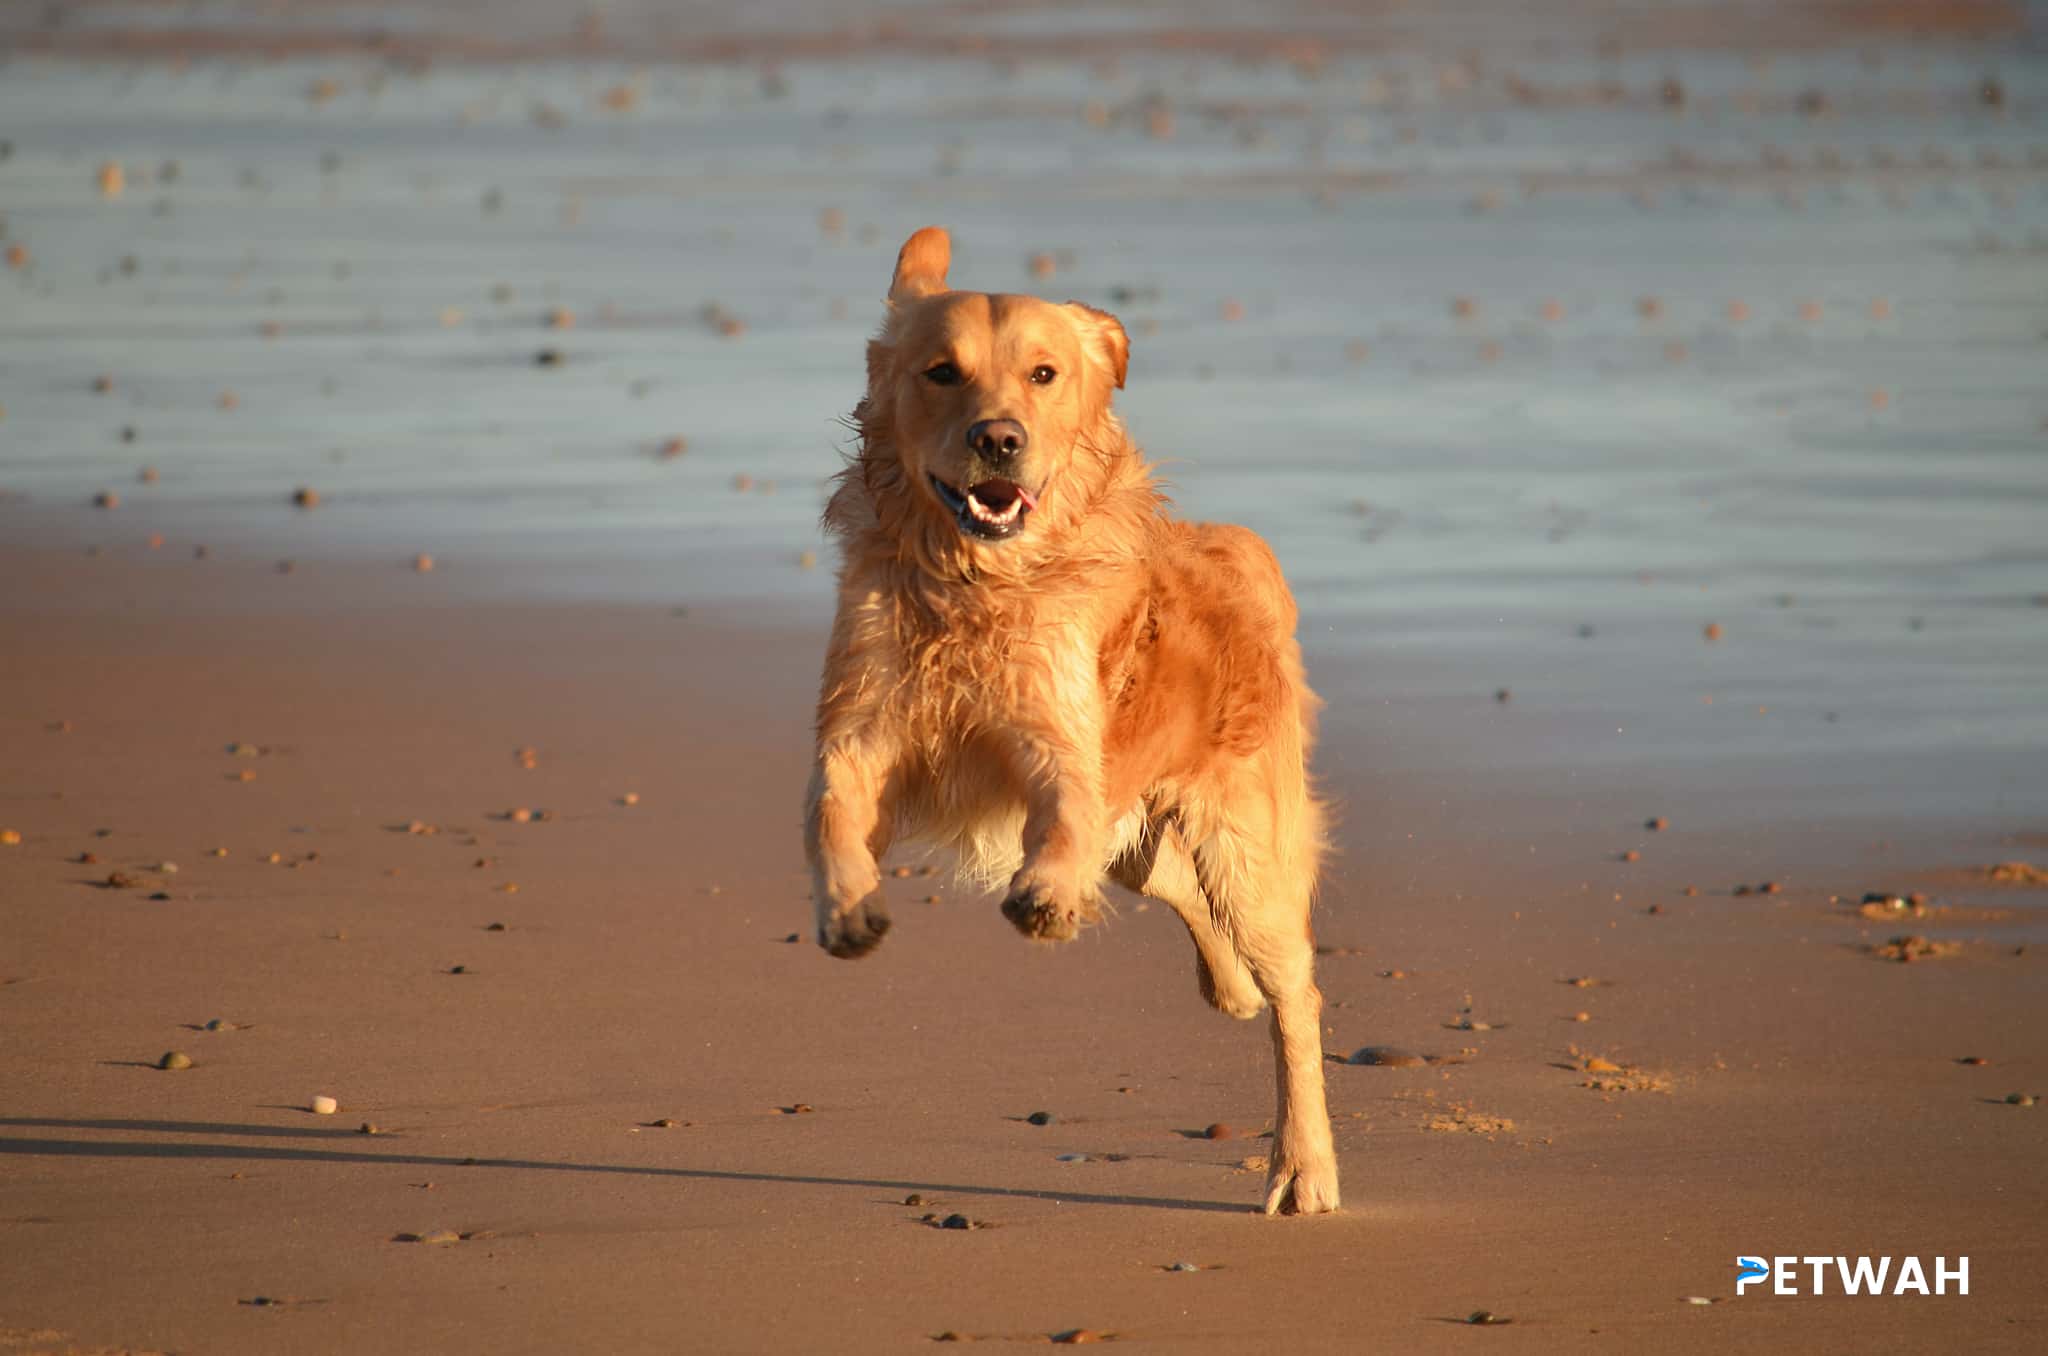 Incorporating Your Golden Retriever into Daily Activities Without Overwhelming Them